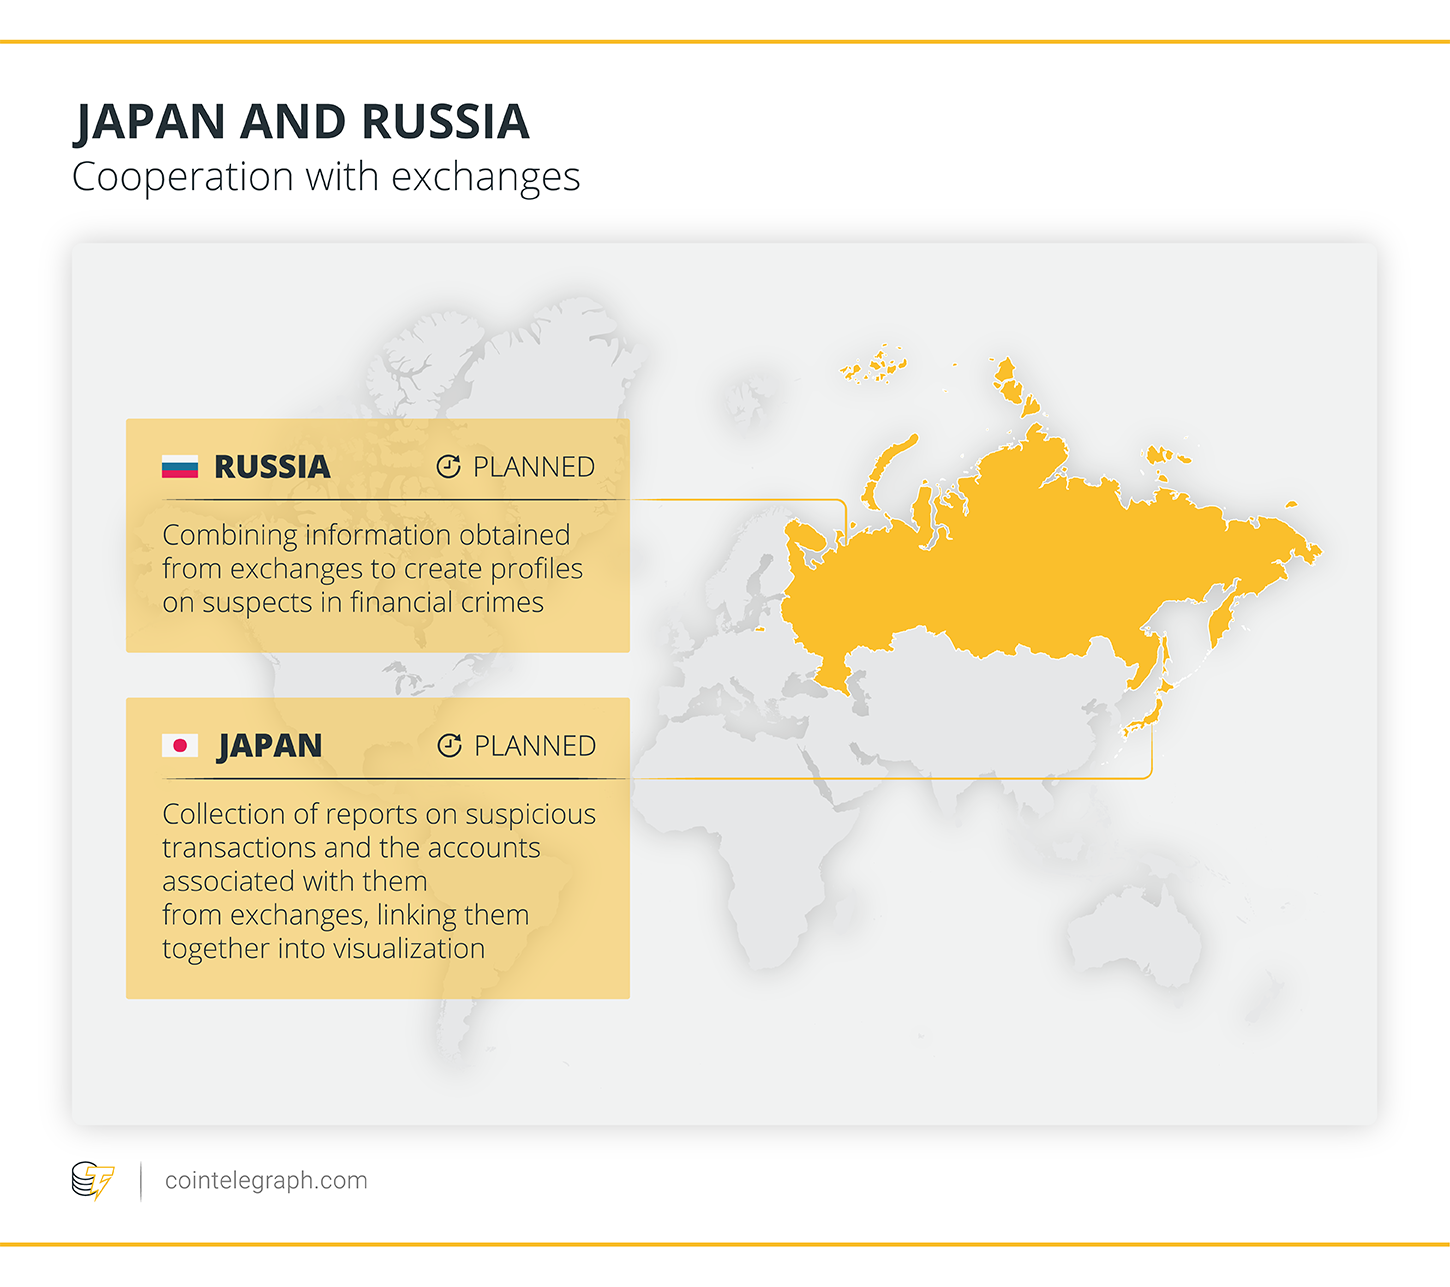 Japan and Russia